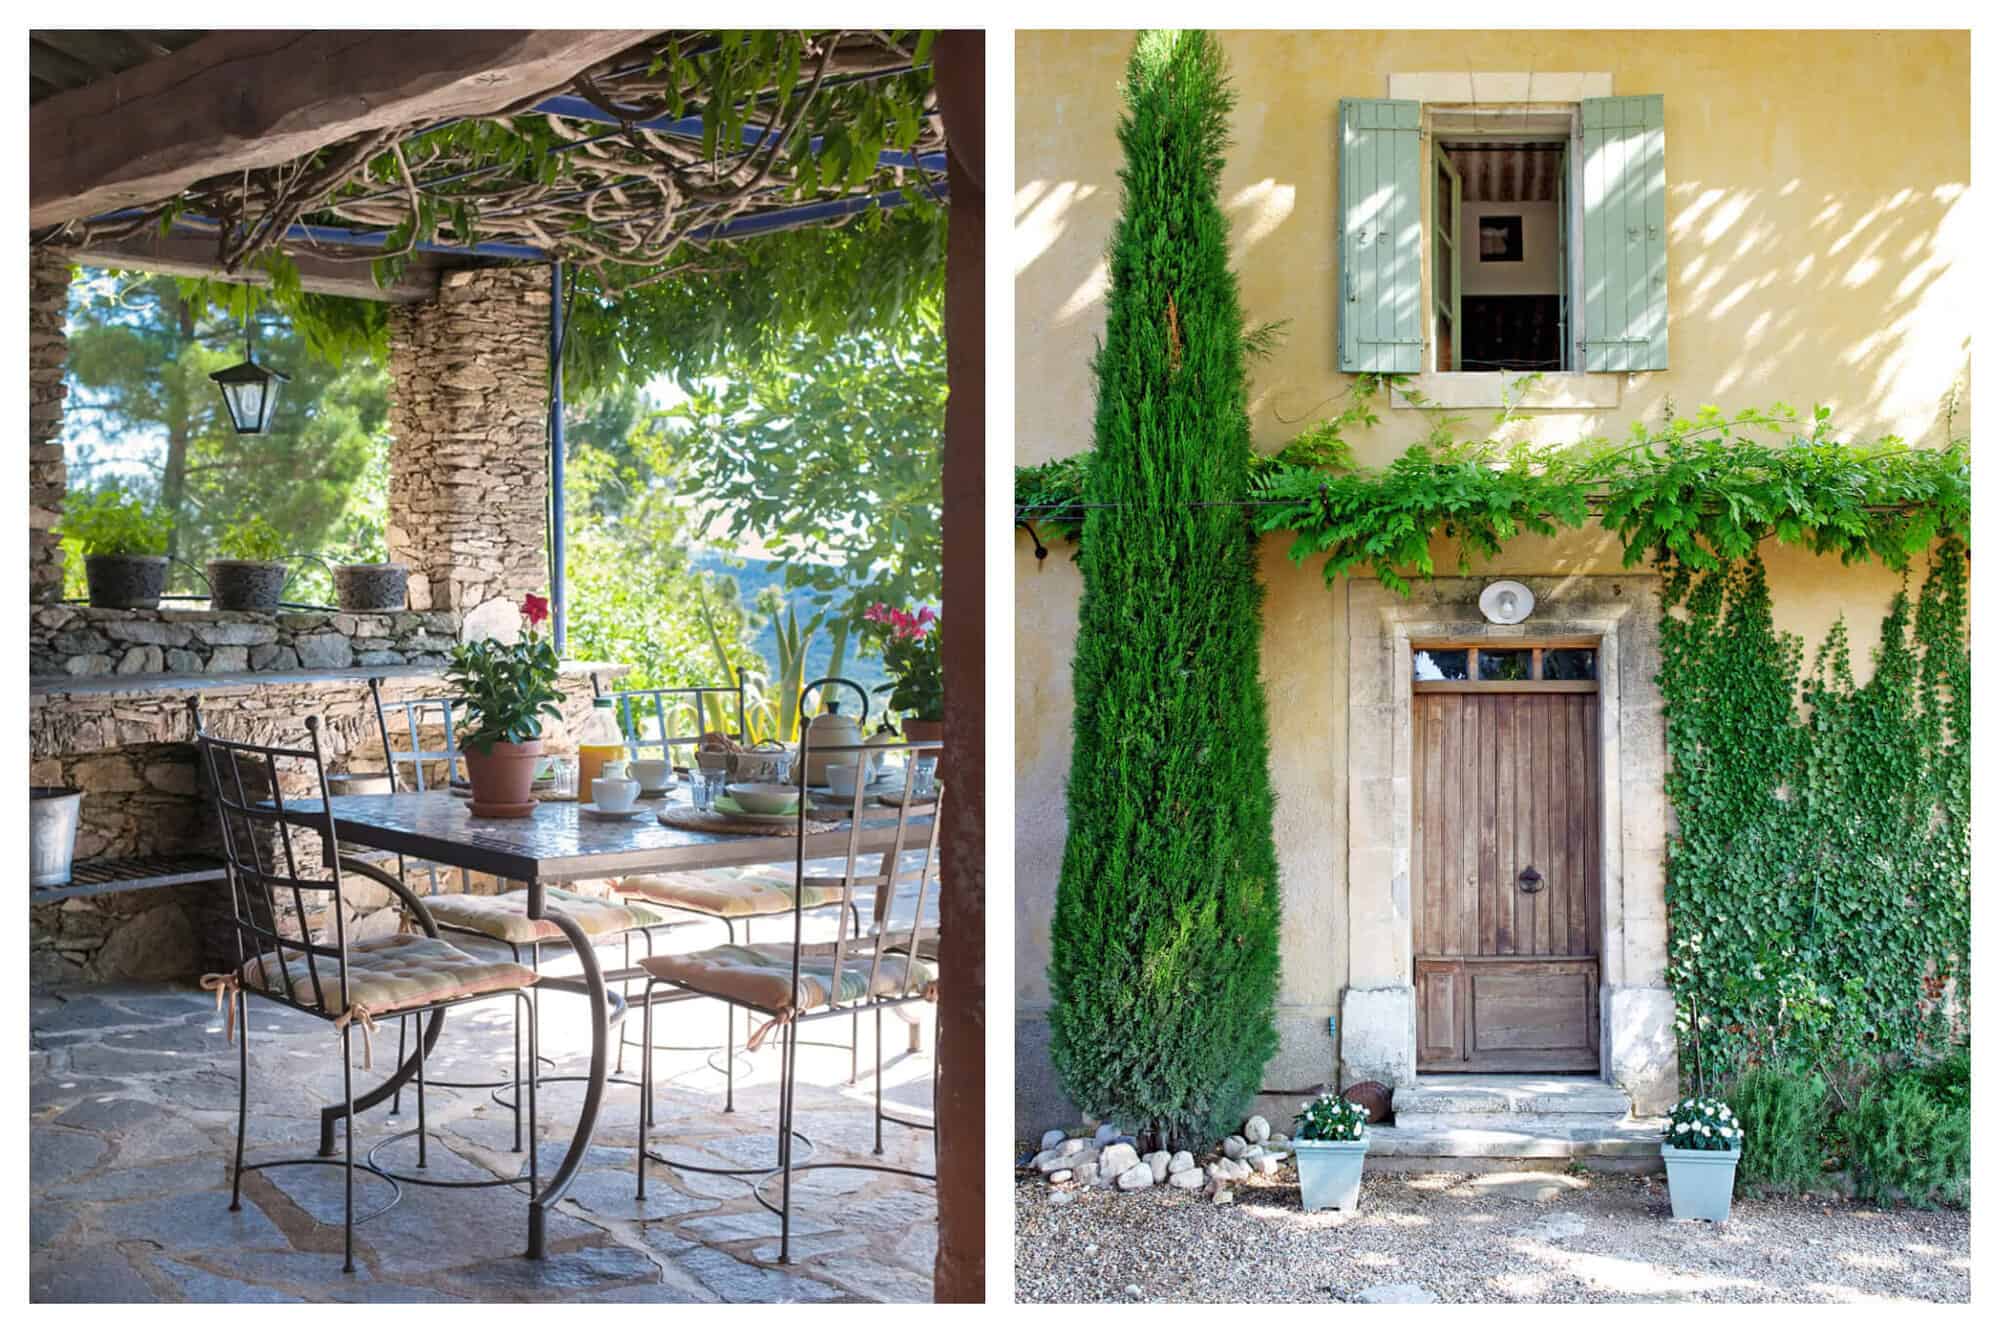 A table set for lunch on the terrace at St. Saturnin with stone floors and walls. An old door and window of the Bonnieux villa with colourful plants and a cypress tree.